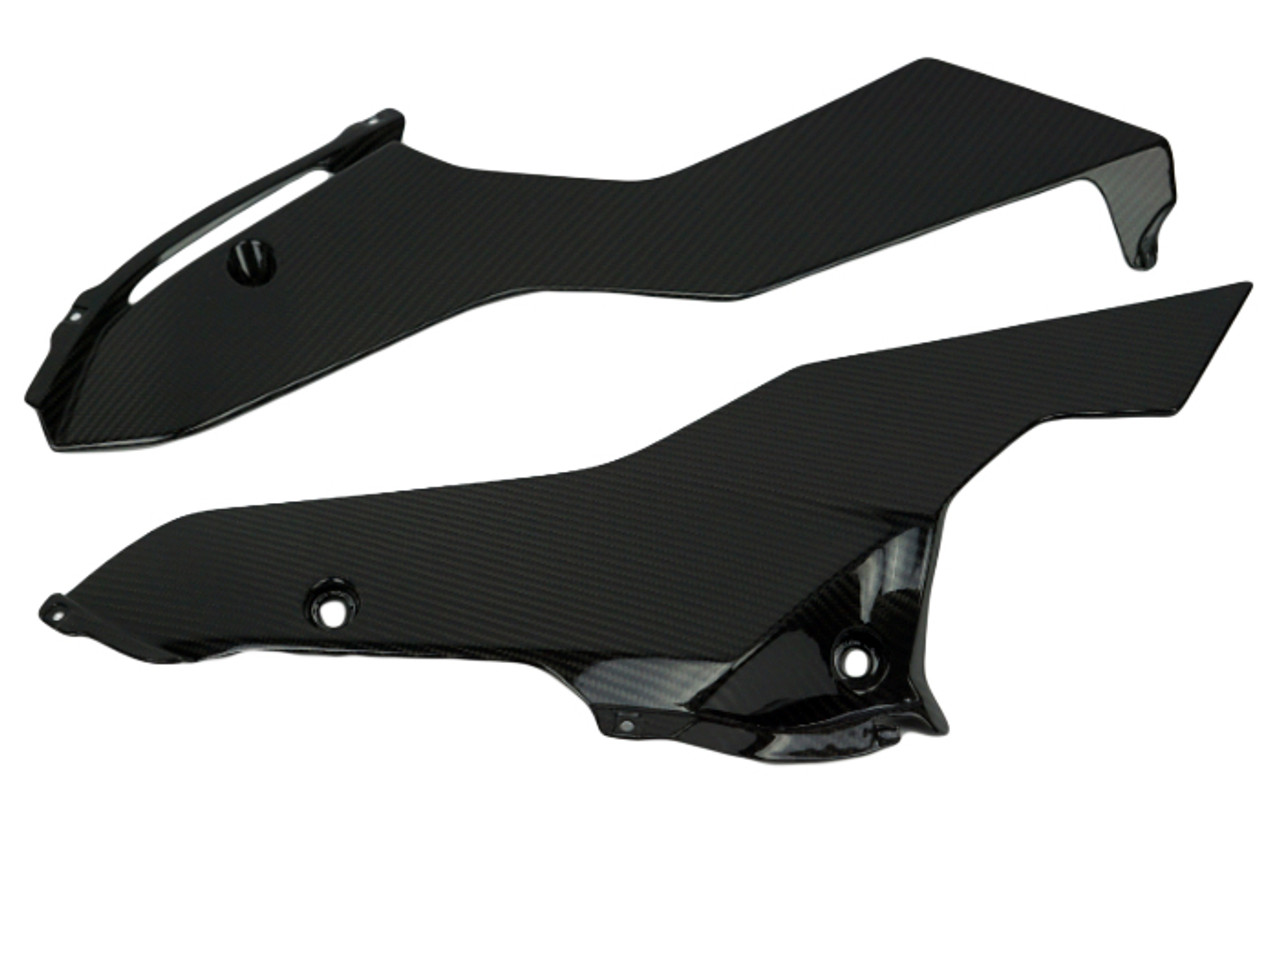 Belly Pan in Glossy Twill Weave Carbon Fiber for Yamaha R6 2017+